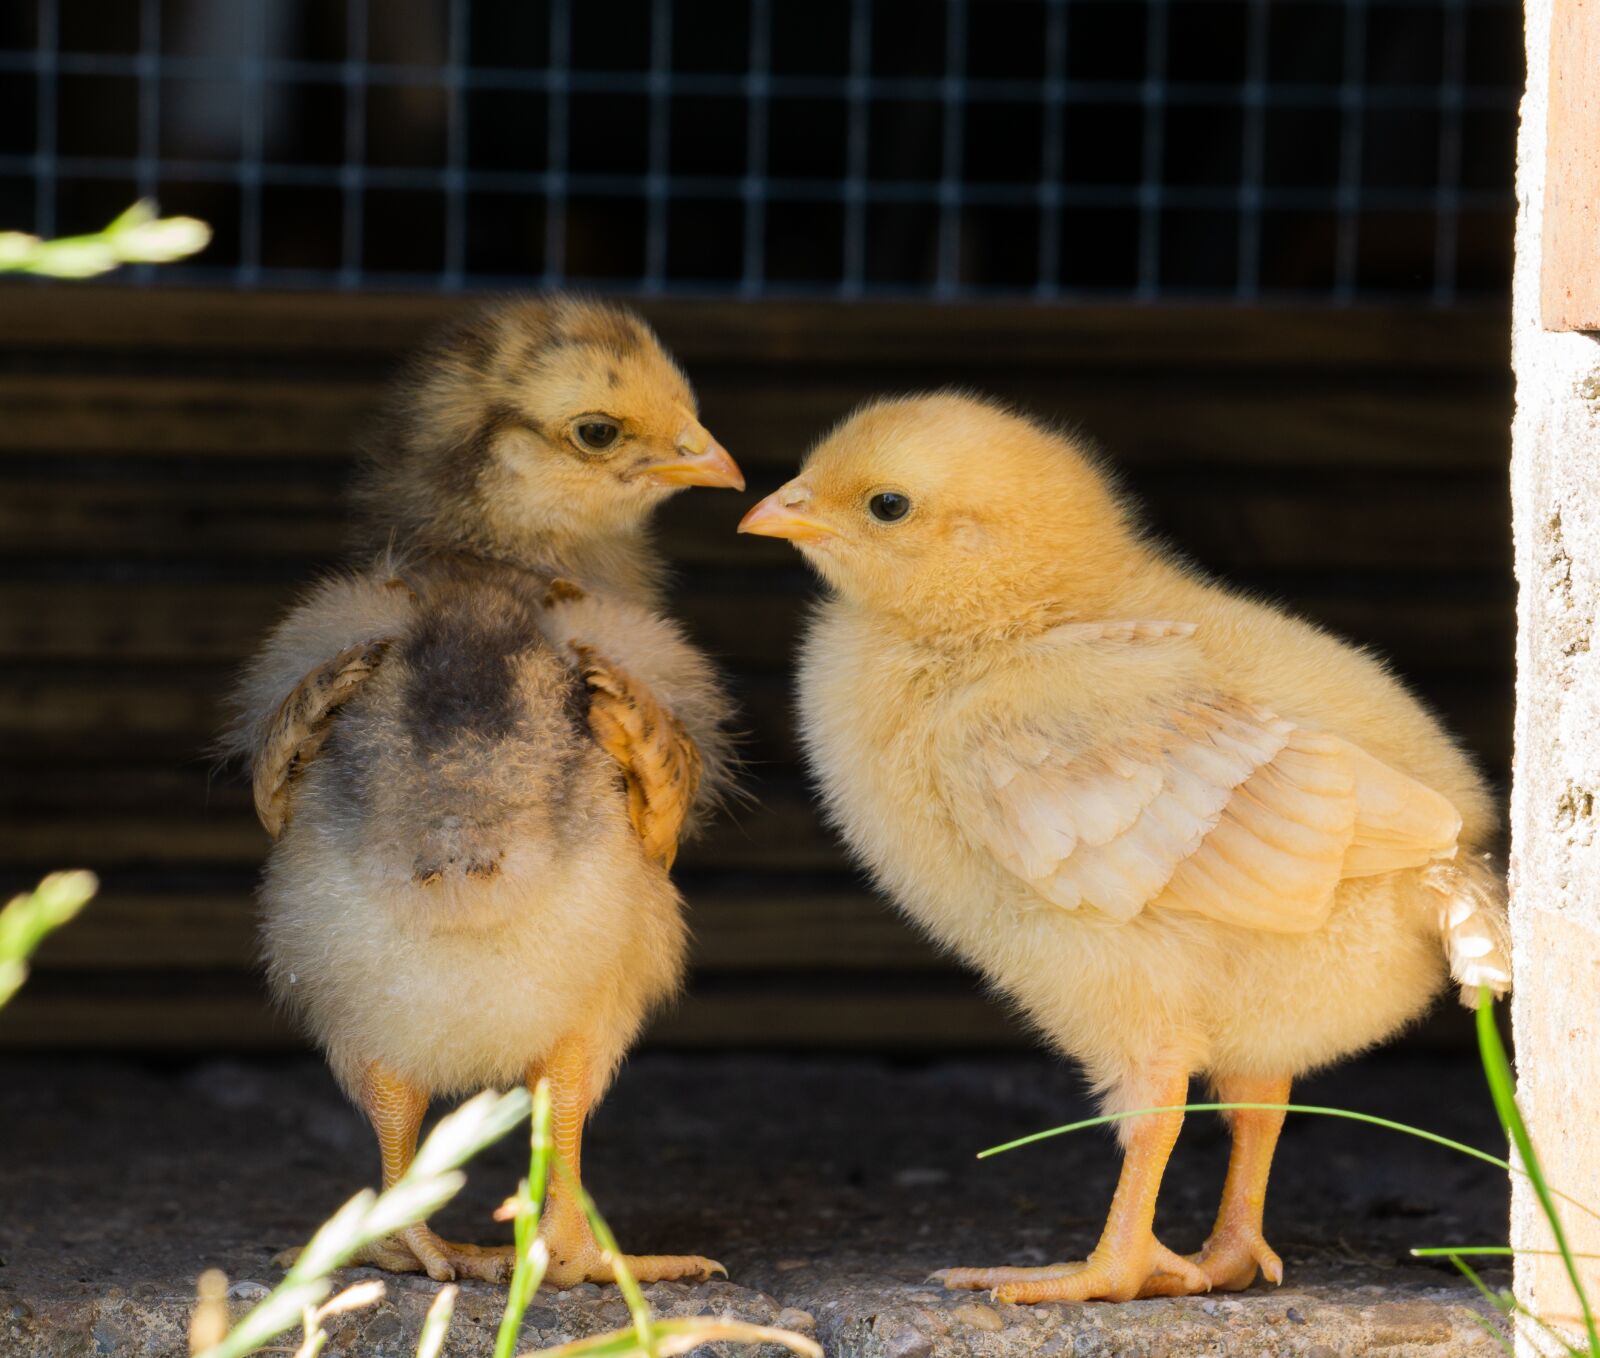 Sony a6000 sample photo. Chicks, small, yellow photography